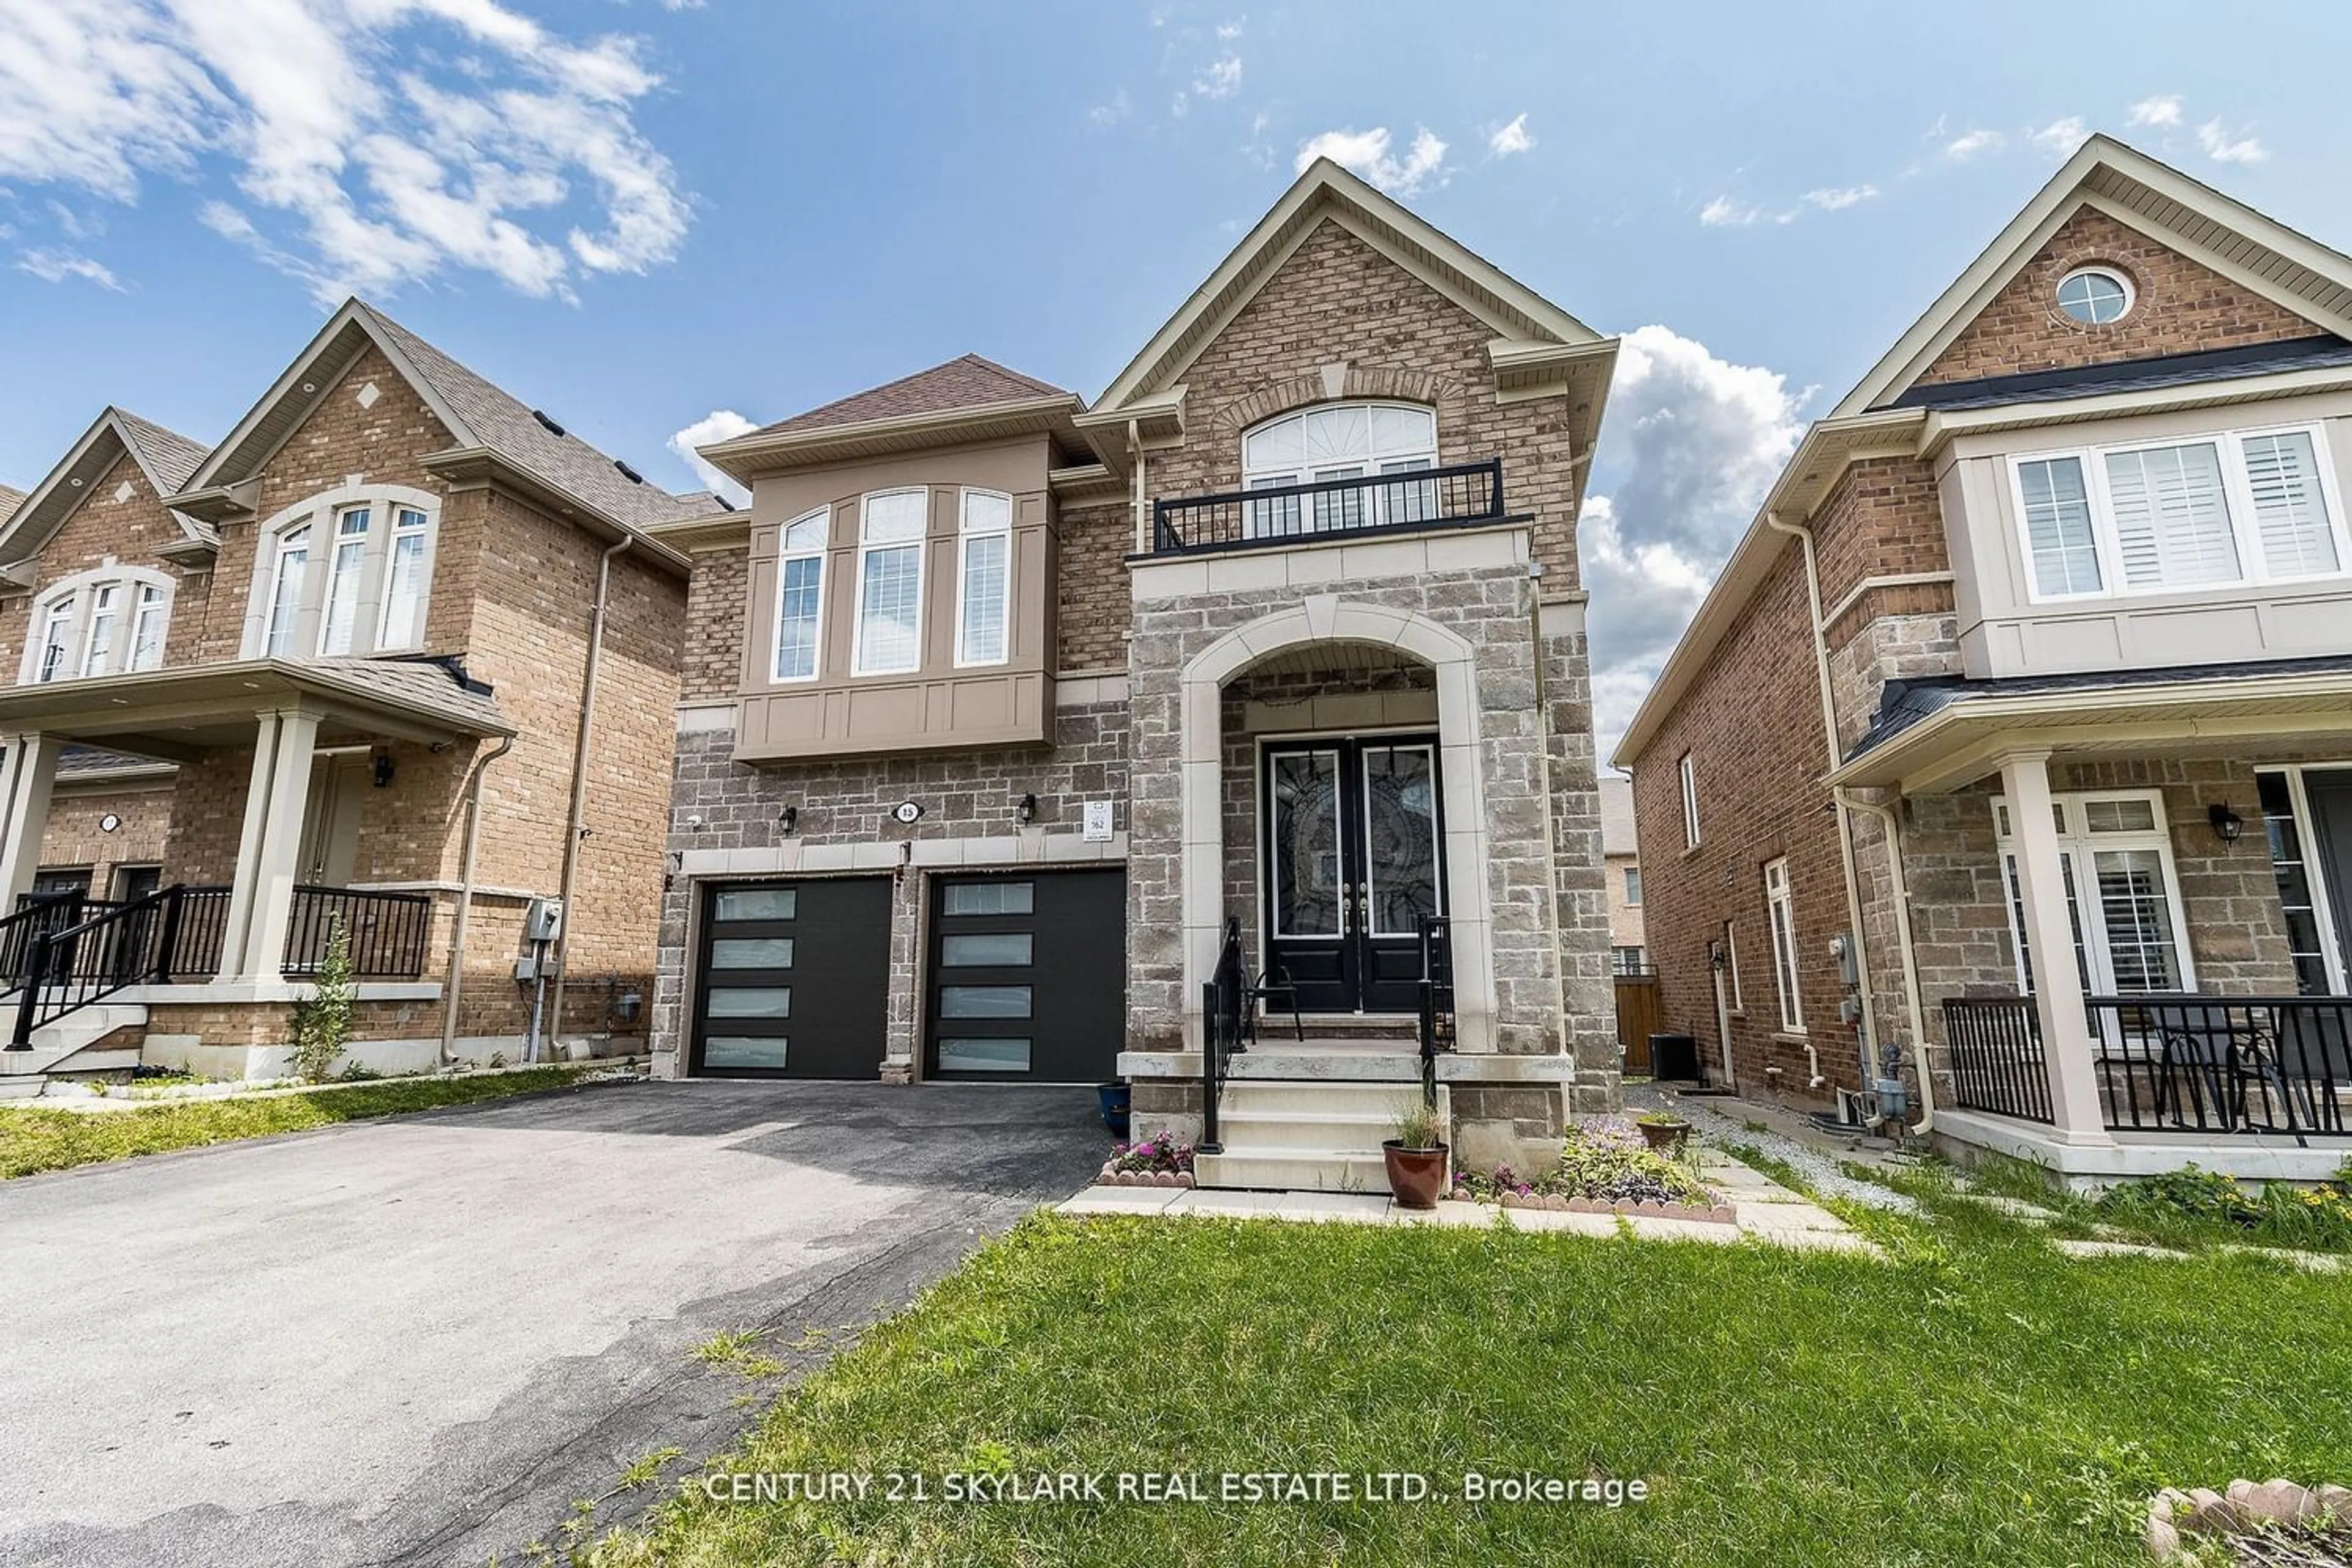 Home with brick exterior material for 15 Ingleside Rd, Brampton Ontario L6Y 0Z2